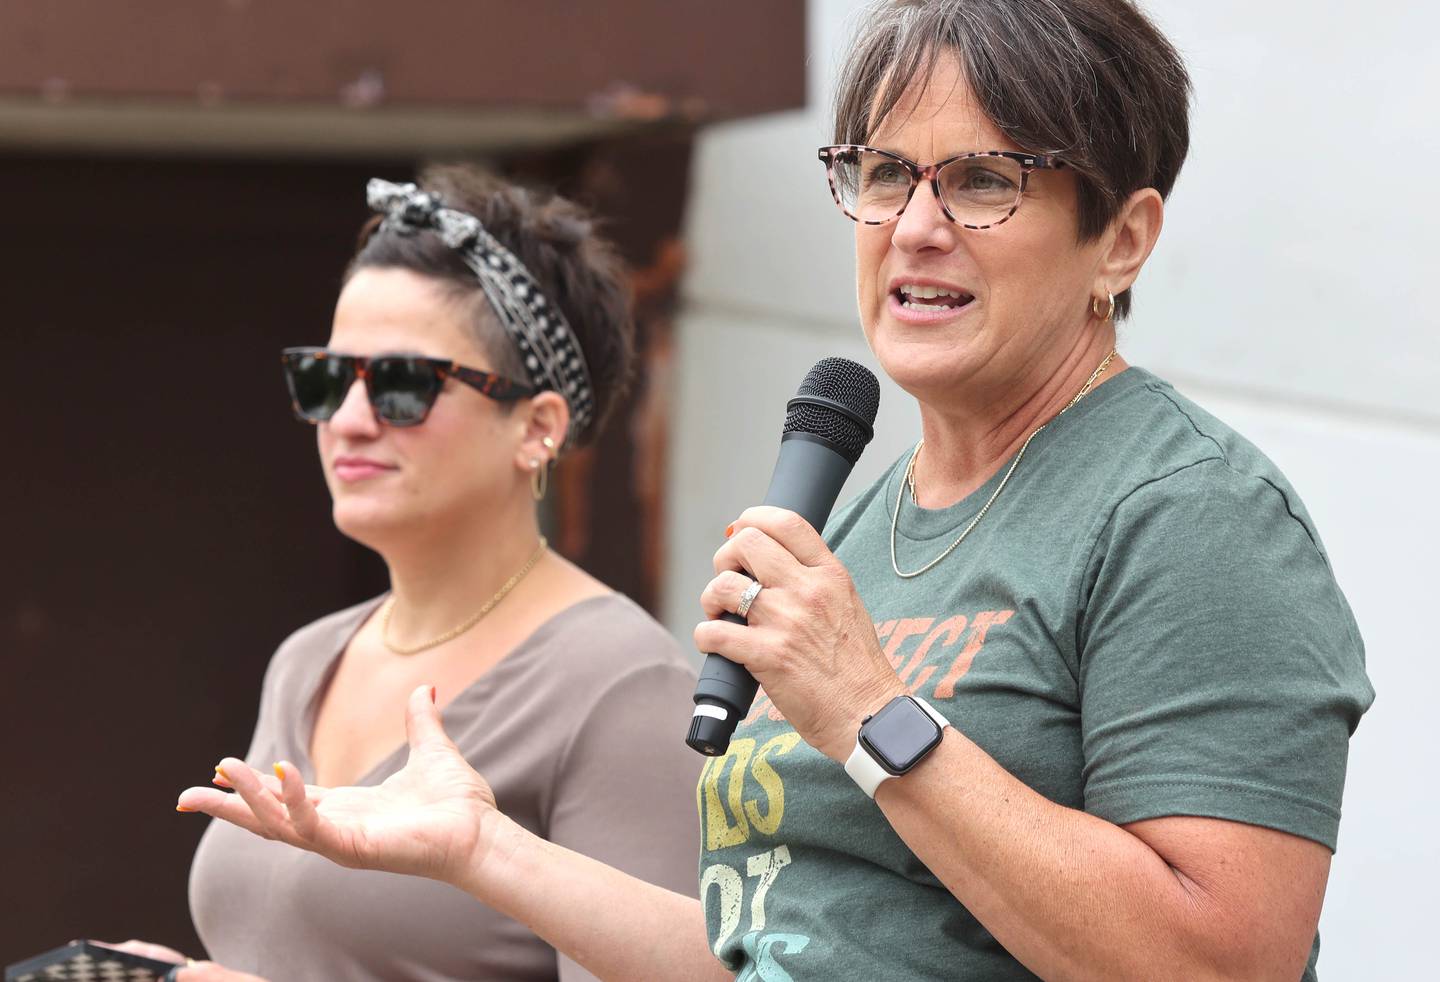 Event organizers Renae Lindenmayer (left) and Mary Lynn Buckner speak Saturday, June 11, 2022, during a March For Our Lives event at Hopkins Park in DeKalb. The March For Our Lives initiative advocates for, among other things, an end to gun violence, updated gun control legislation and policy targeting gun lobbyists.